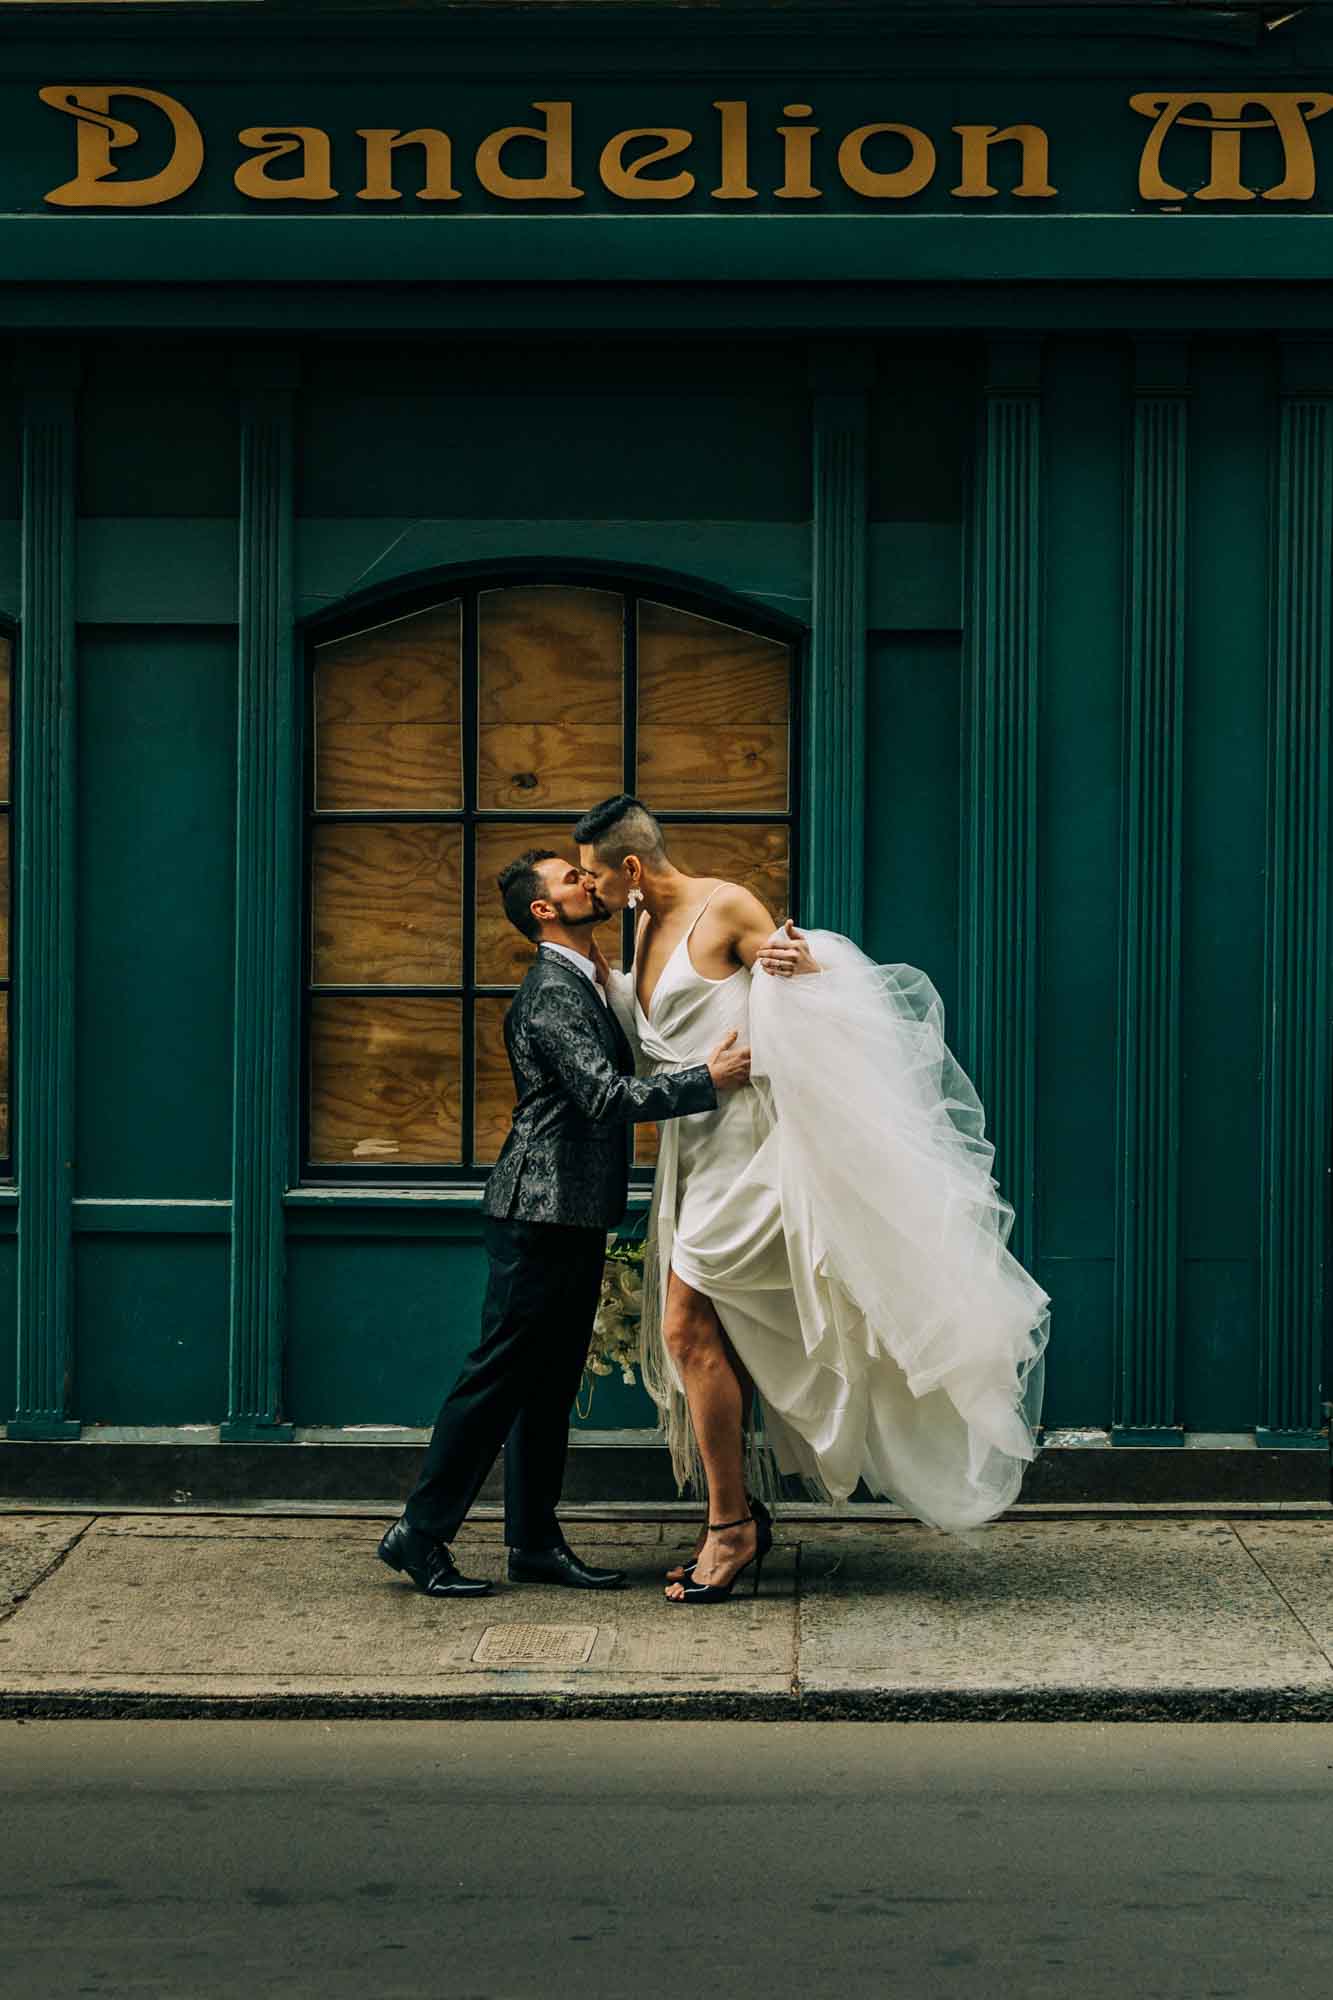  Elegance, style and gender fluidity at this styled shoot inside a speakeasy |Rebecca Stone Photography | Featured on Equally Wed, the leading LGBTQ+ wedding magazine 